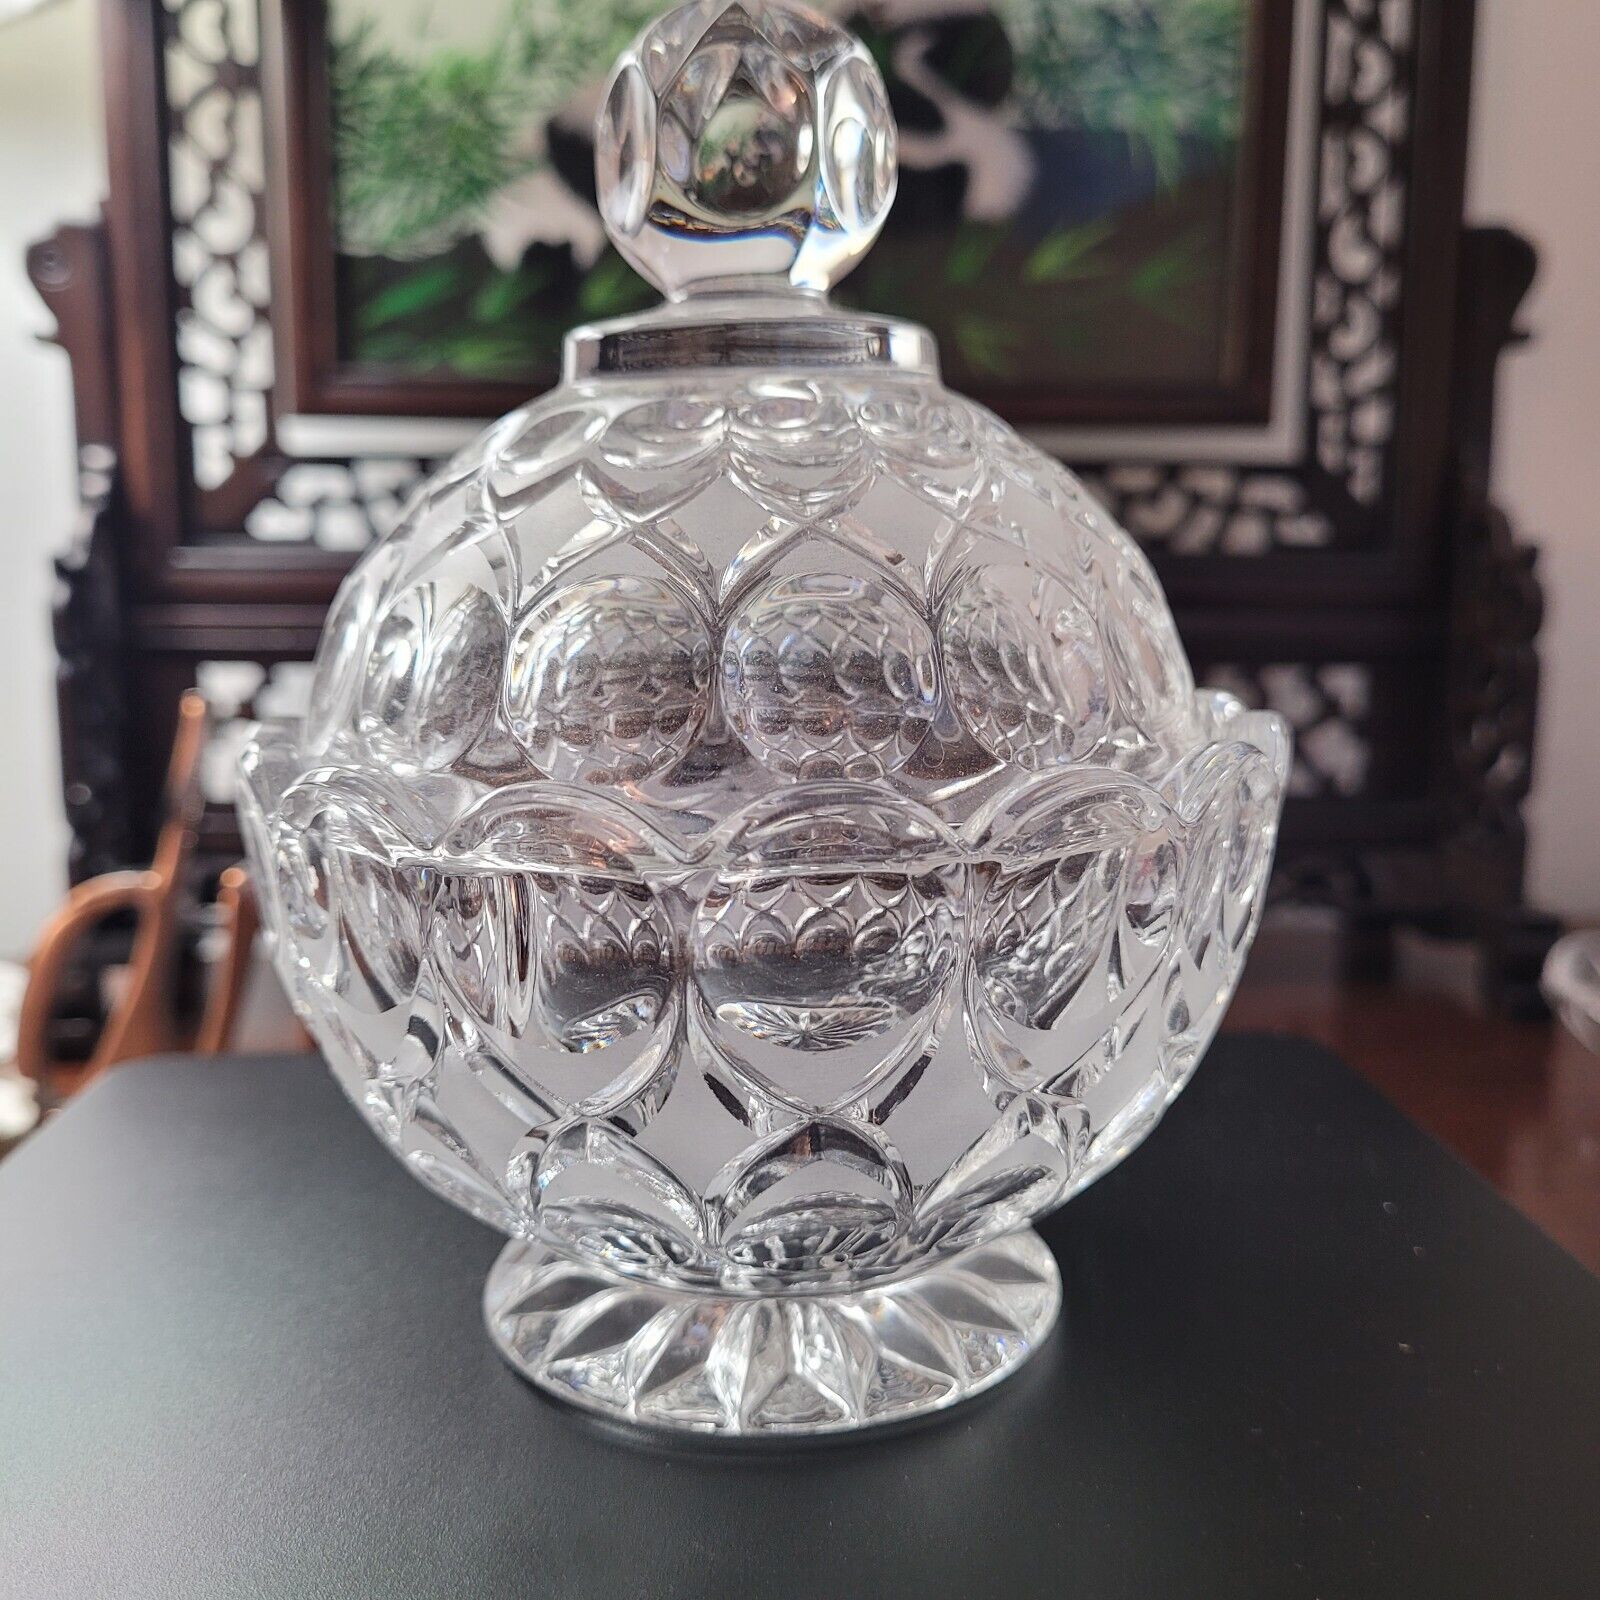 Vintage NACHTMANN BLIEKRISTALL CRYSTAL ANGLIA PATTERN COVERED Sugar Candy Dish